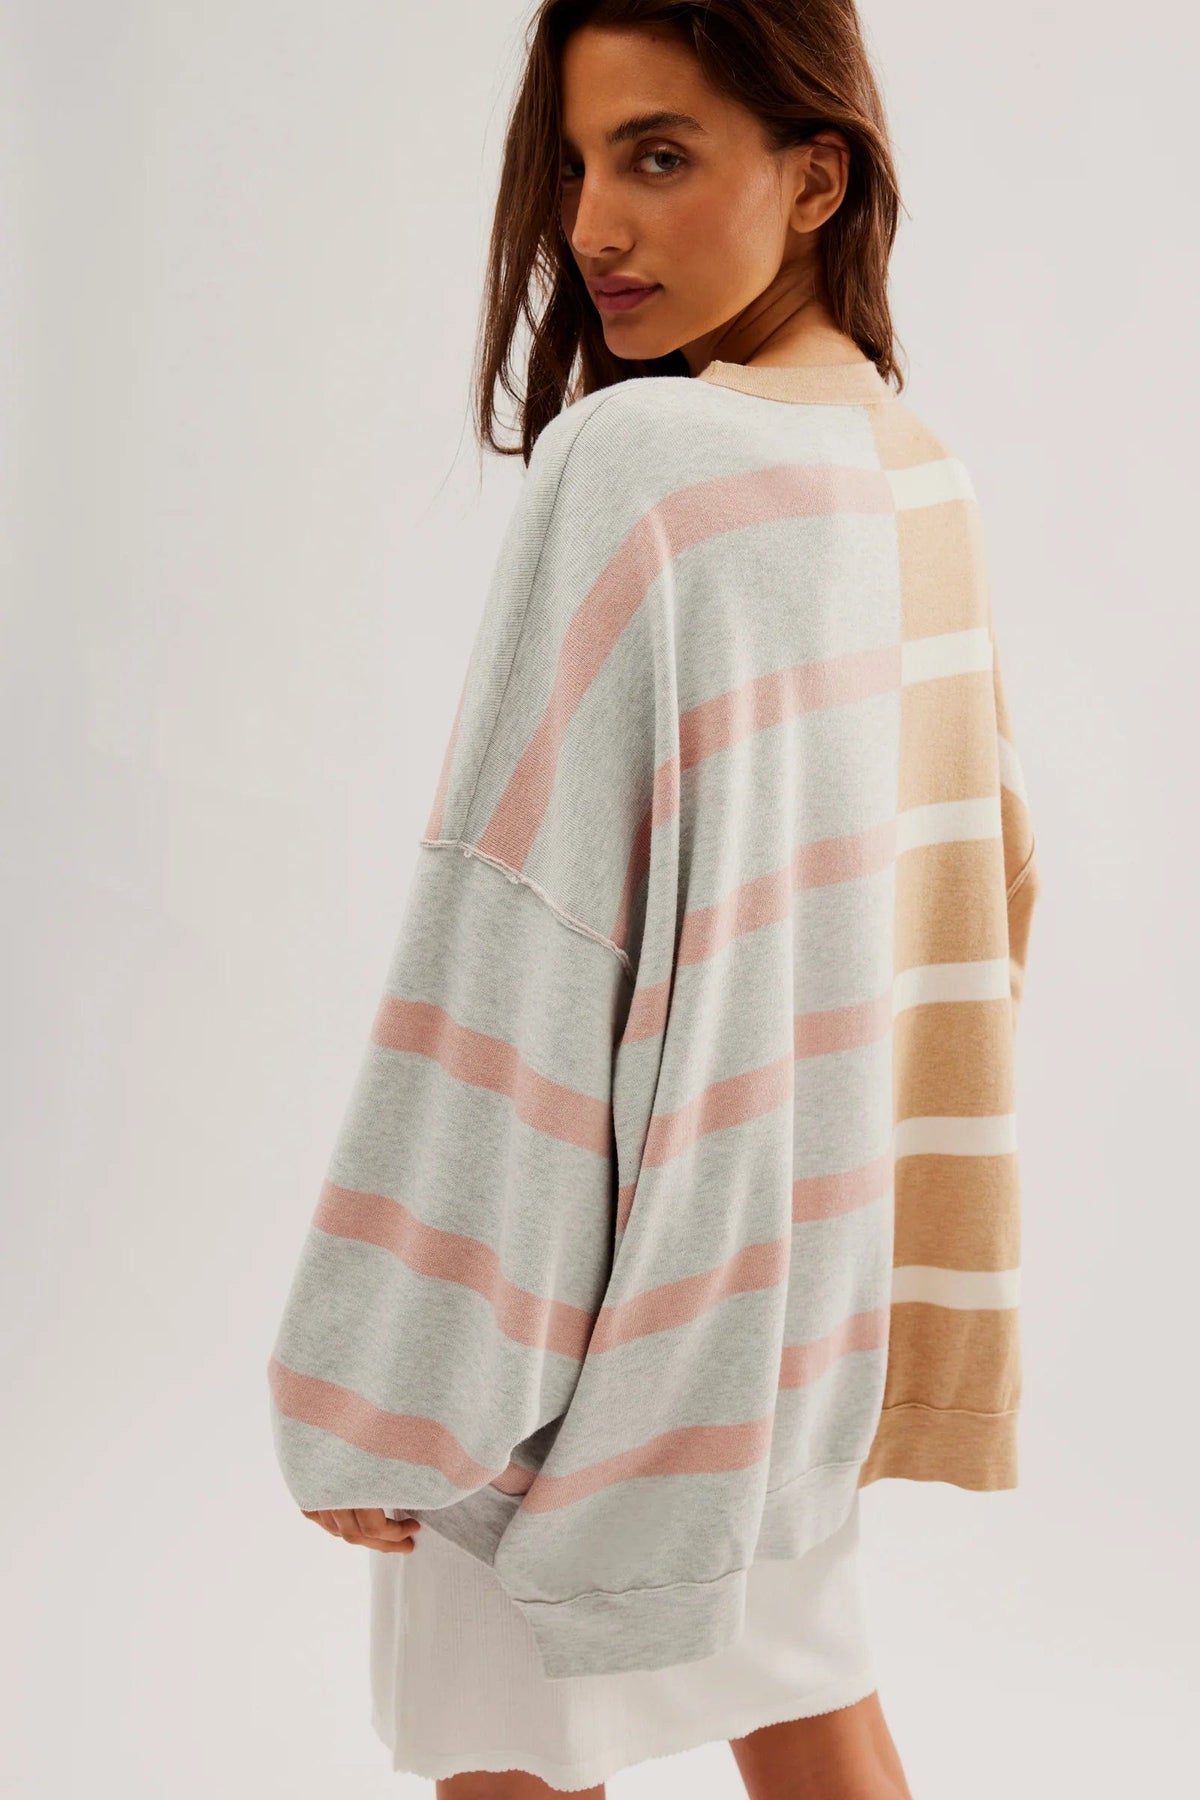 Free People Uptown Stripe Pullover in Camel Grey Combo